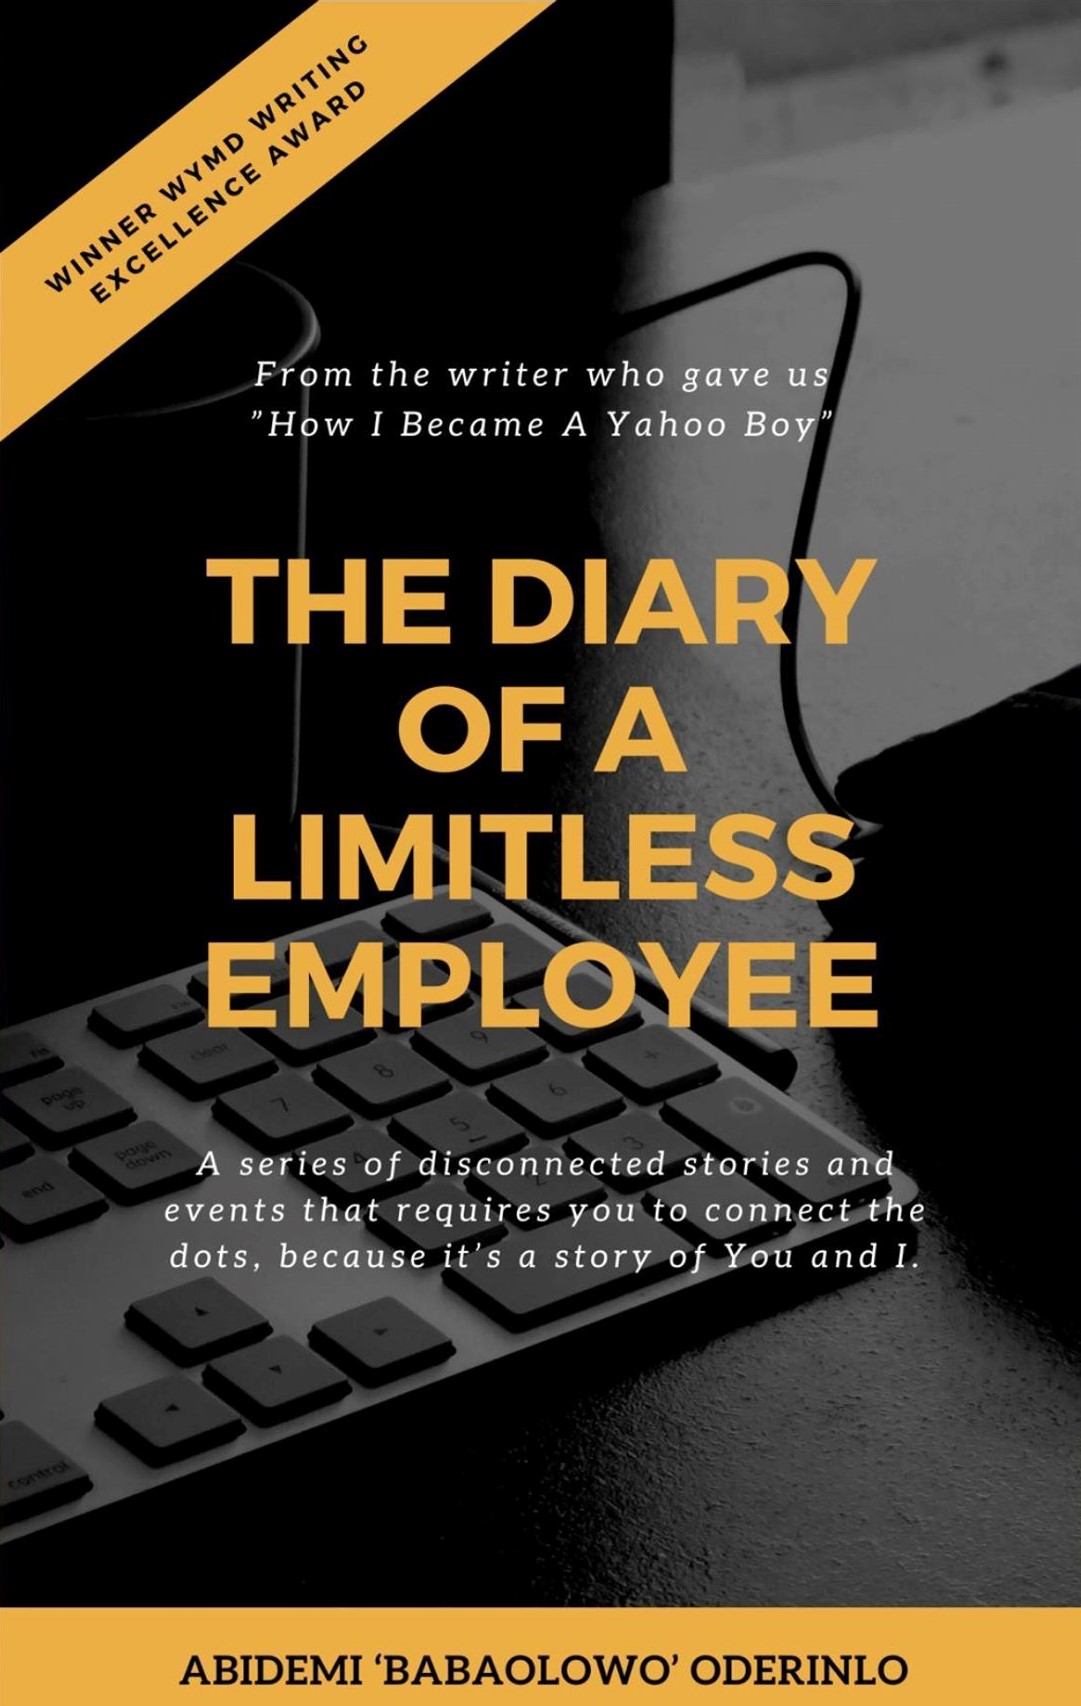 Diary of a Limitless Employee